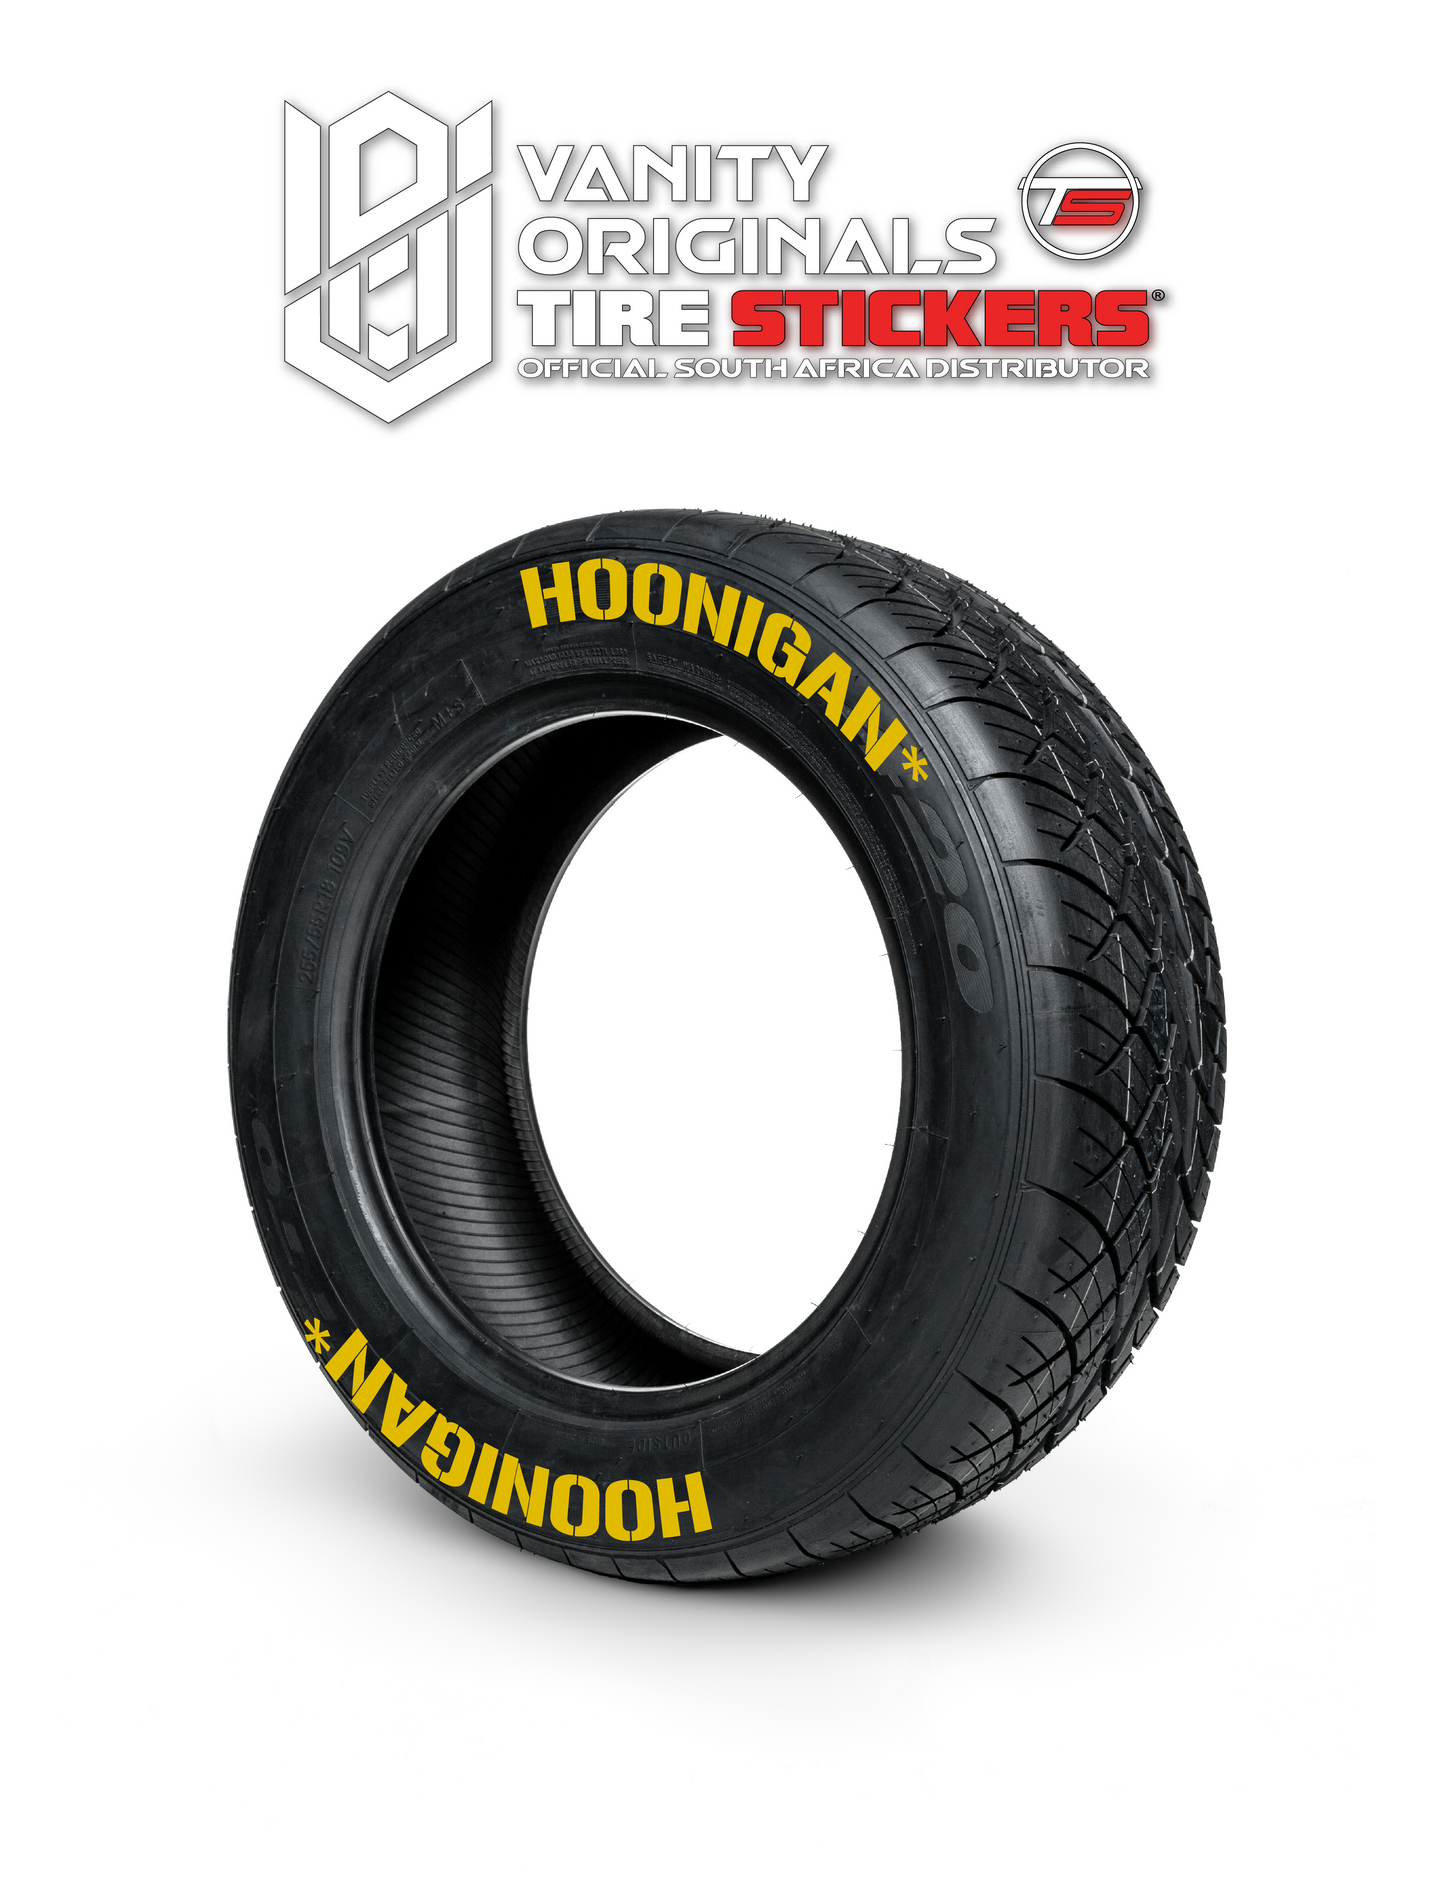 Hoonigan ( 8x Rubber Decals, Adhesive & Instructions Included )